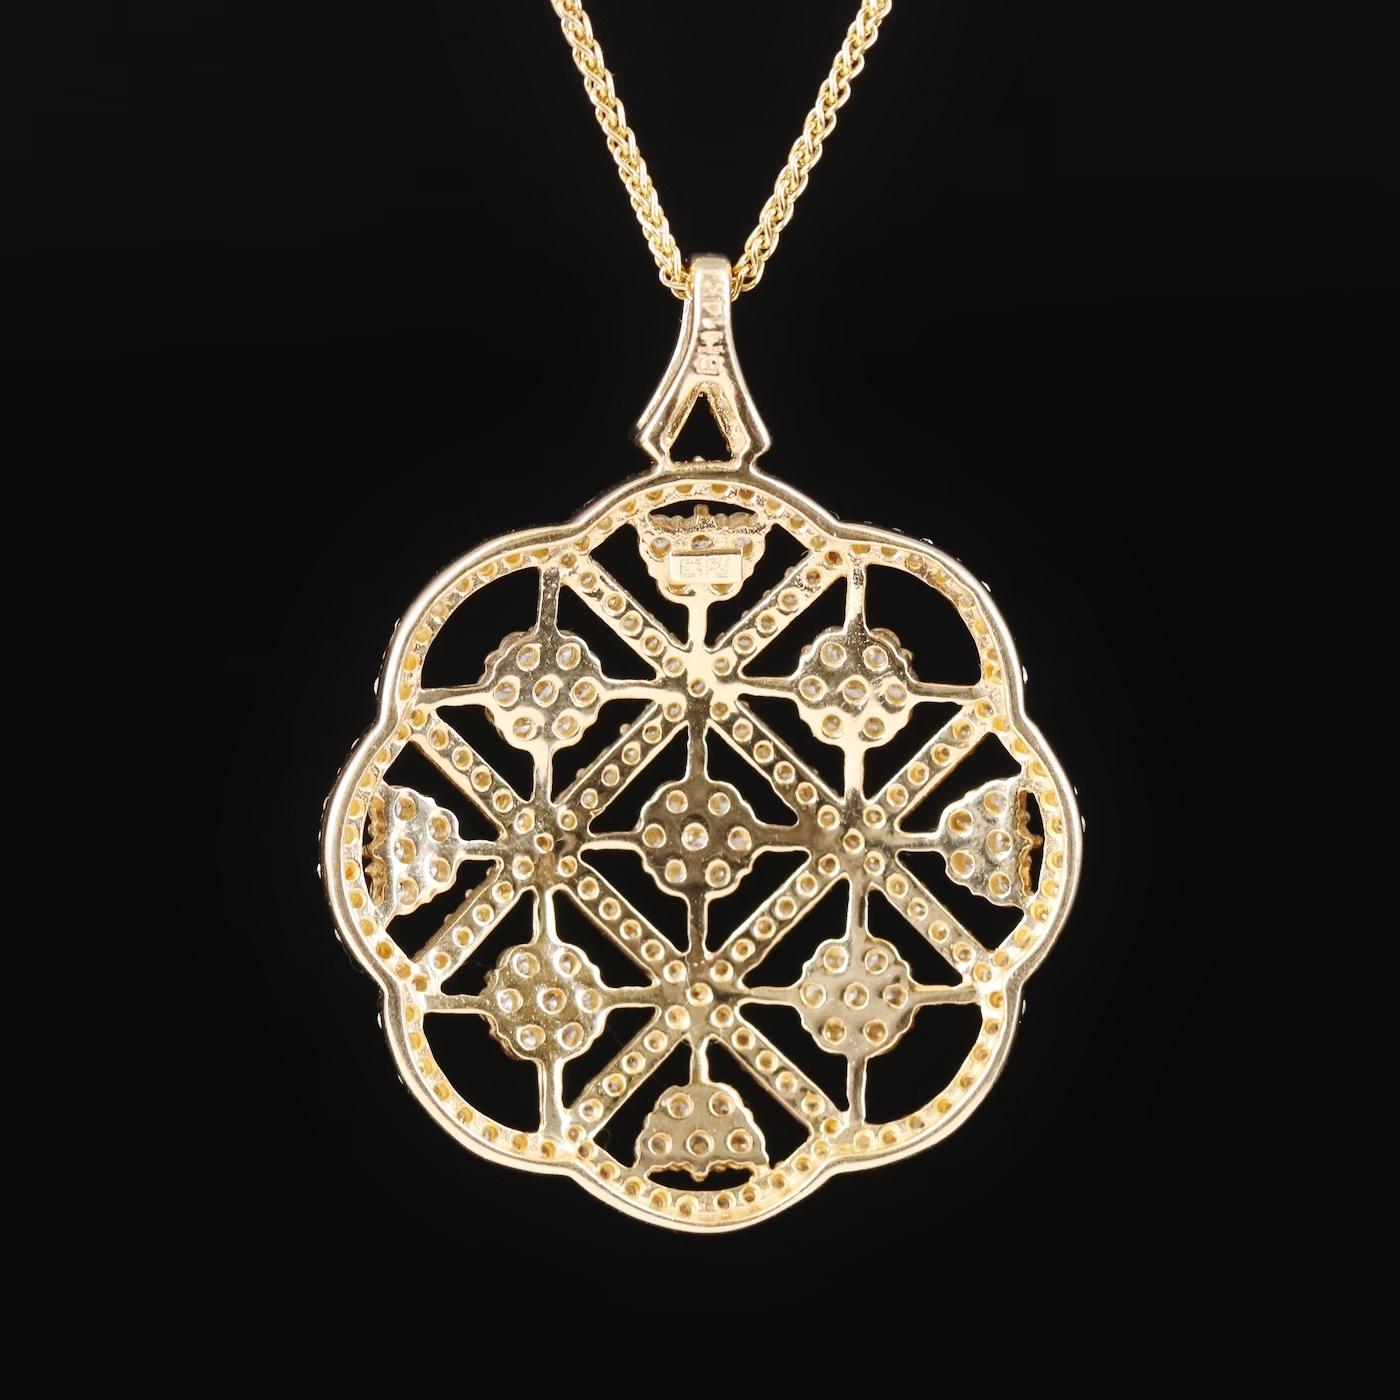 Women's $9500 / New / Limited Edition / Effy 2.2 Ct Diamond Octofoil Necklace / 14k